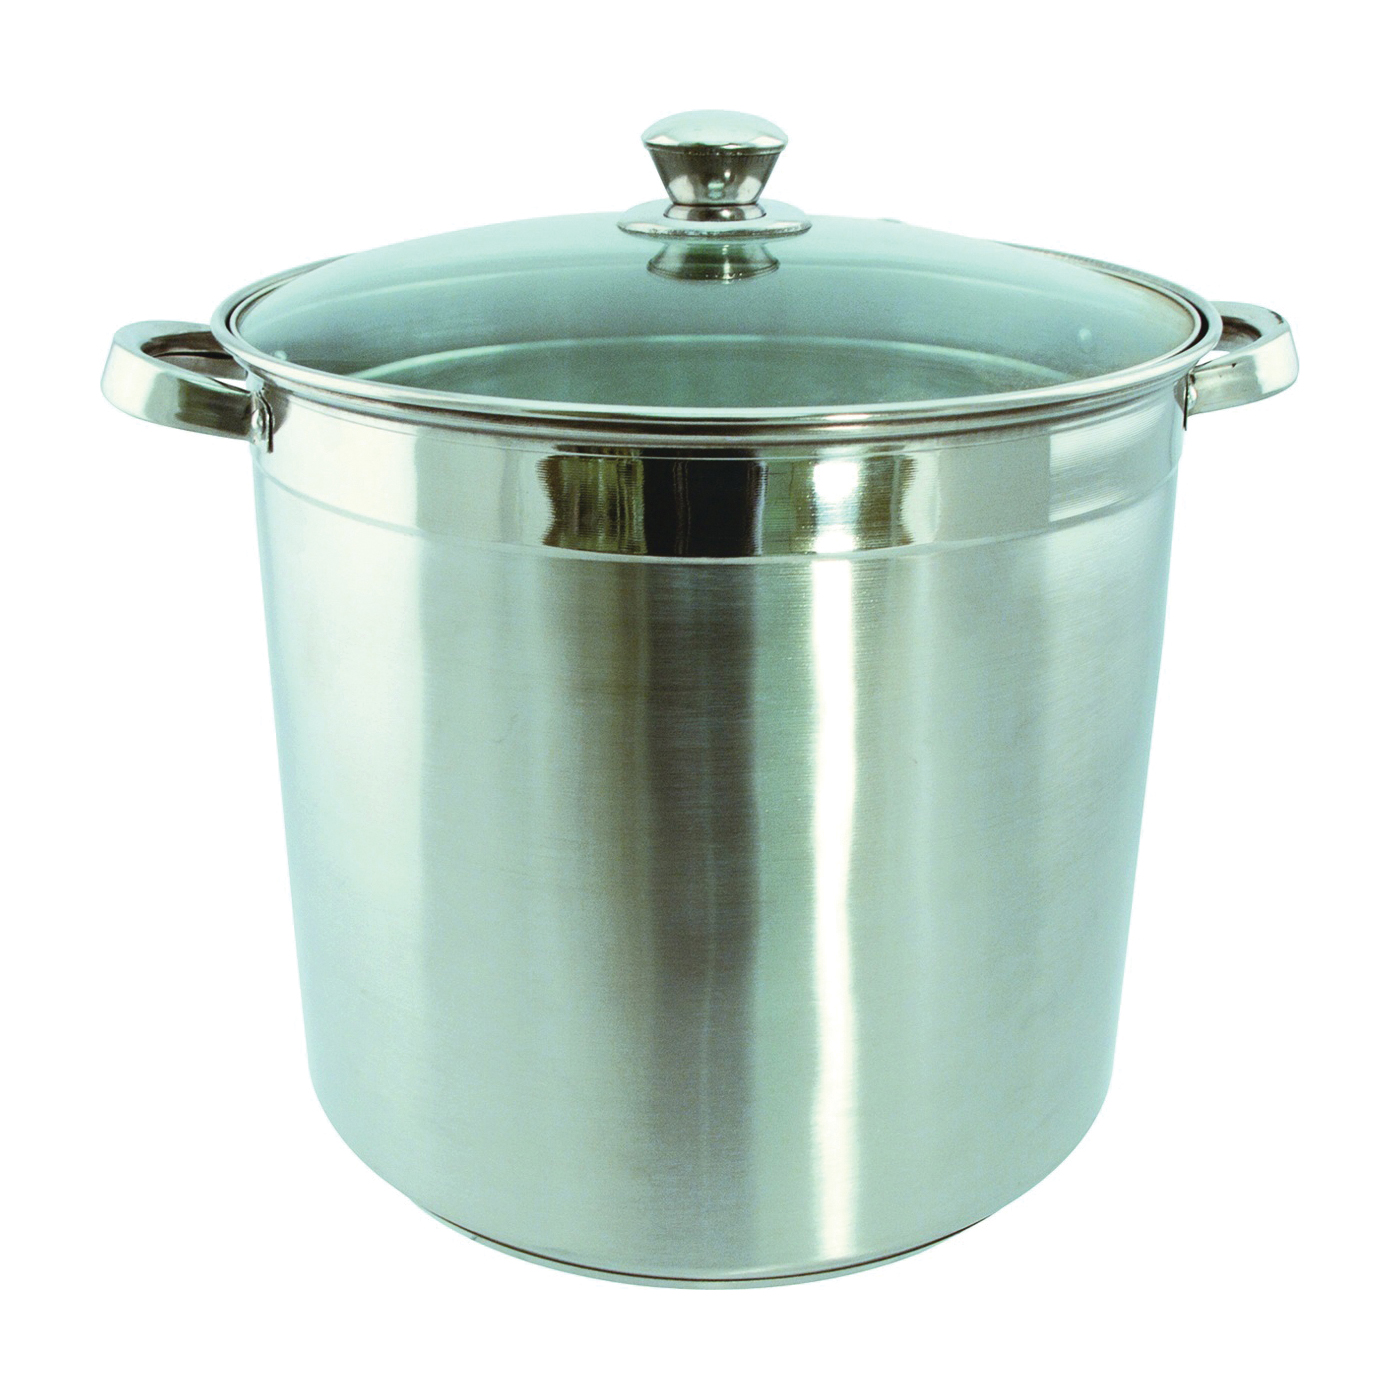 Euro-Ware 3016 Stock Pot with Lid, 16 qt Capacity, Stainless Steel - 1